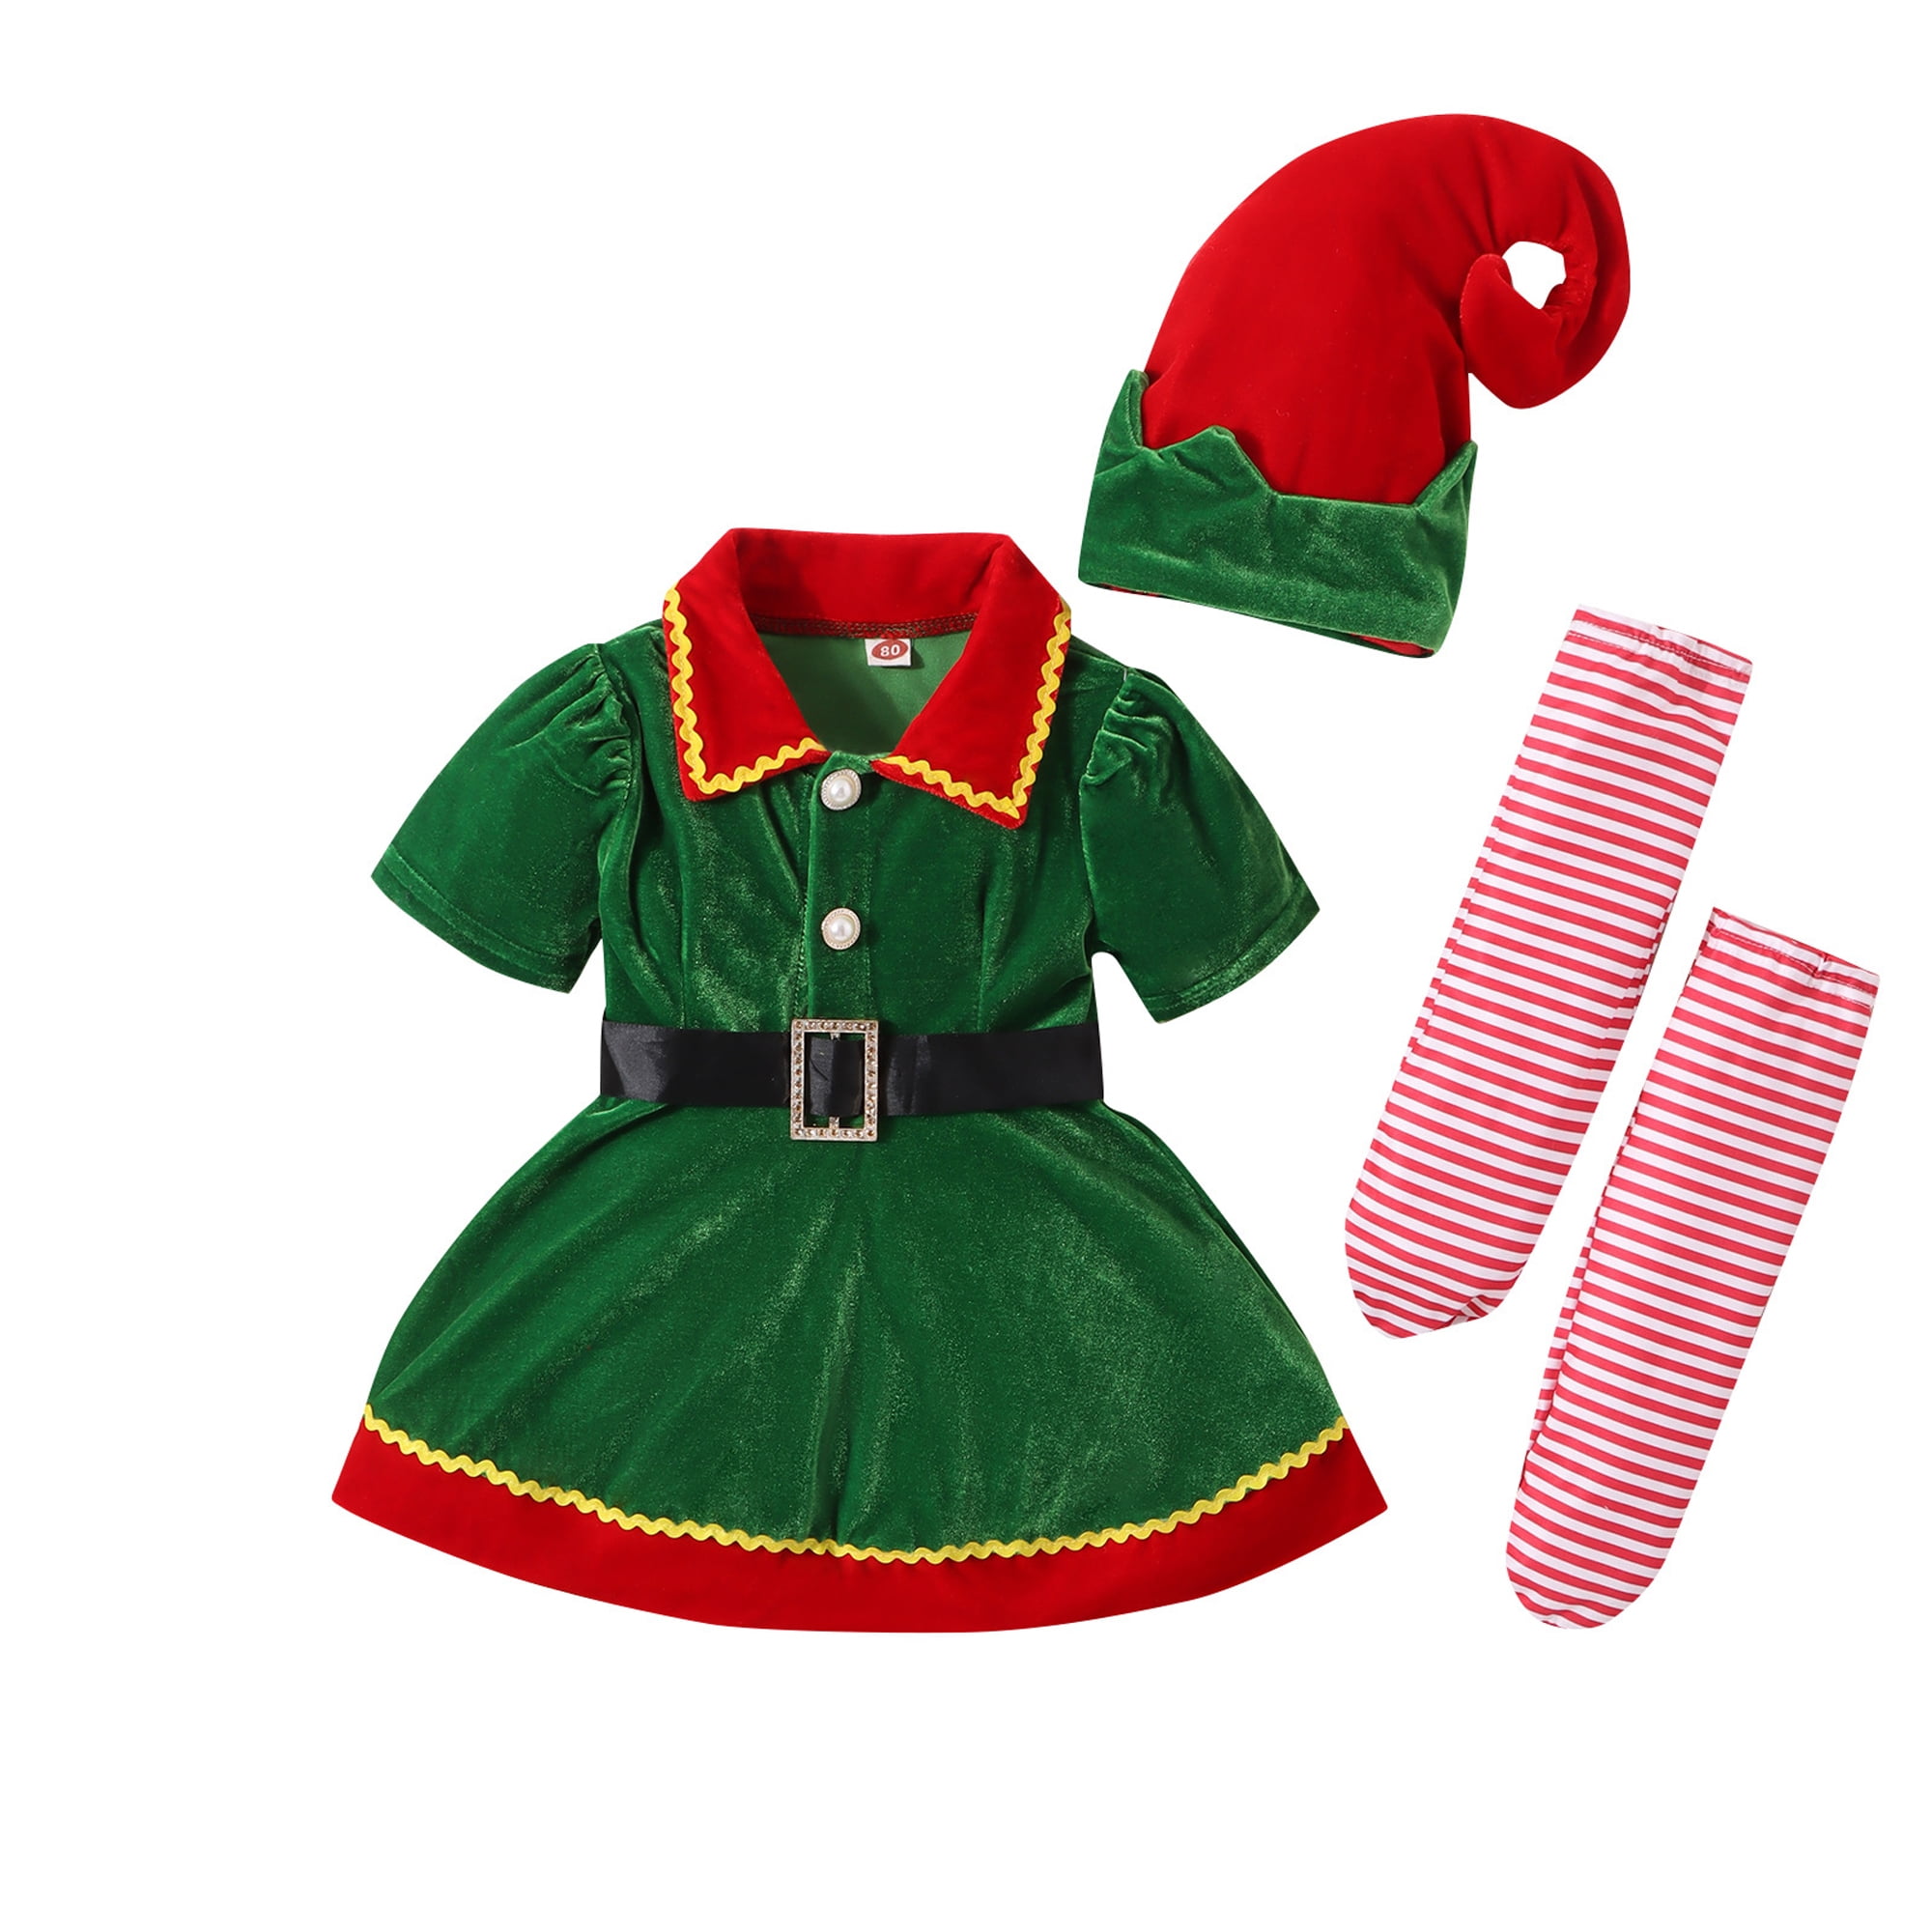 Sprifallbaby Toddler Baby Girls Christmas Elf Costume, Contrast Color ...